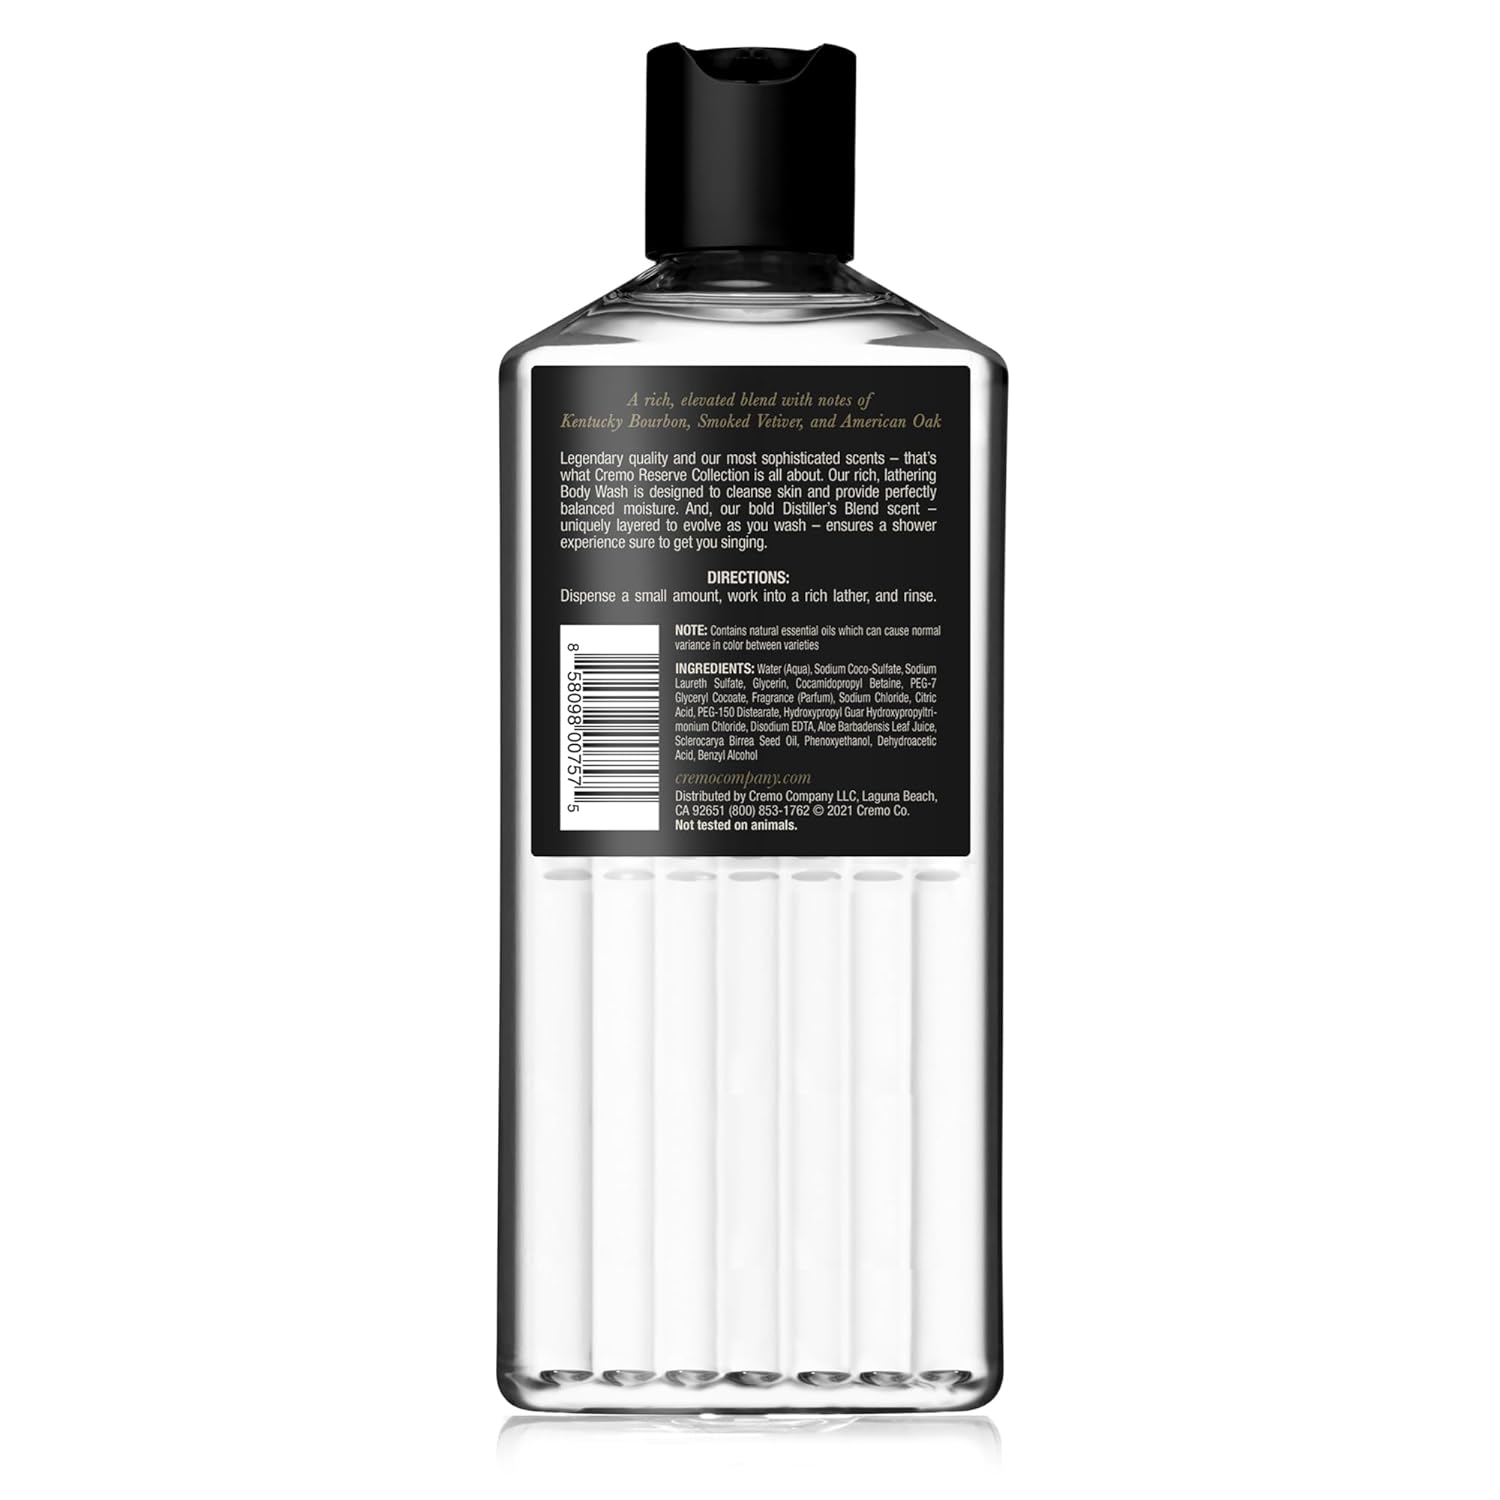 Cremo Rich-Lathering Distiller’s Blend Body Wash for Men, An Elevated Blend with Notes of Kentucky Bourbon, Smoked Vetiver and American Oak, 16 Fl Oz : Beauty & Personal Care